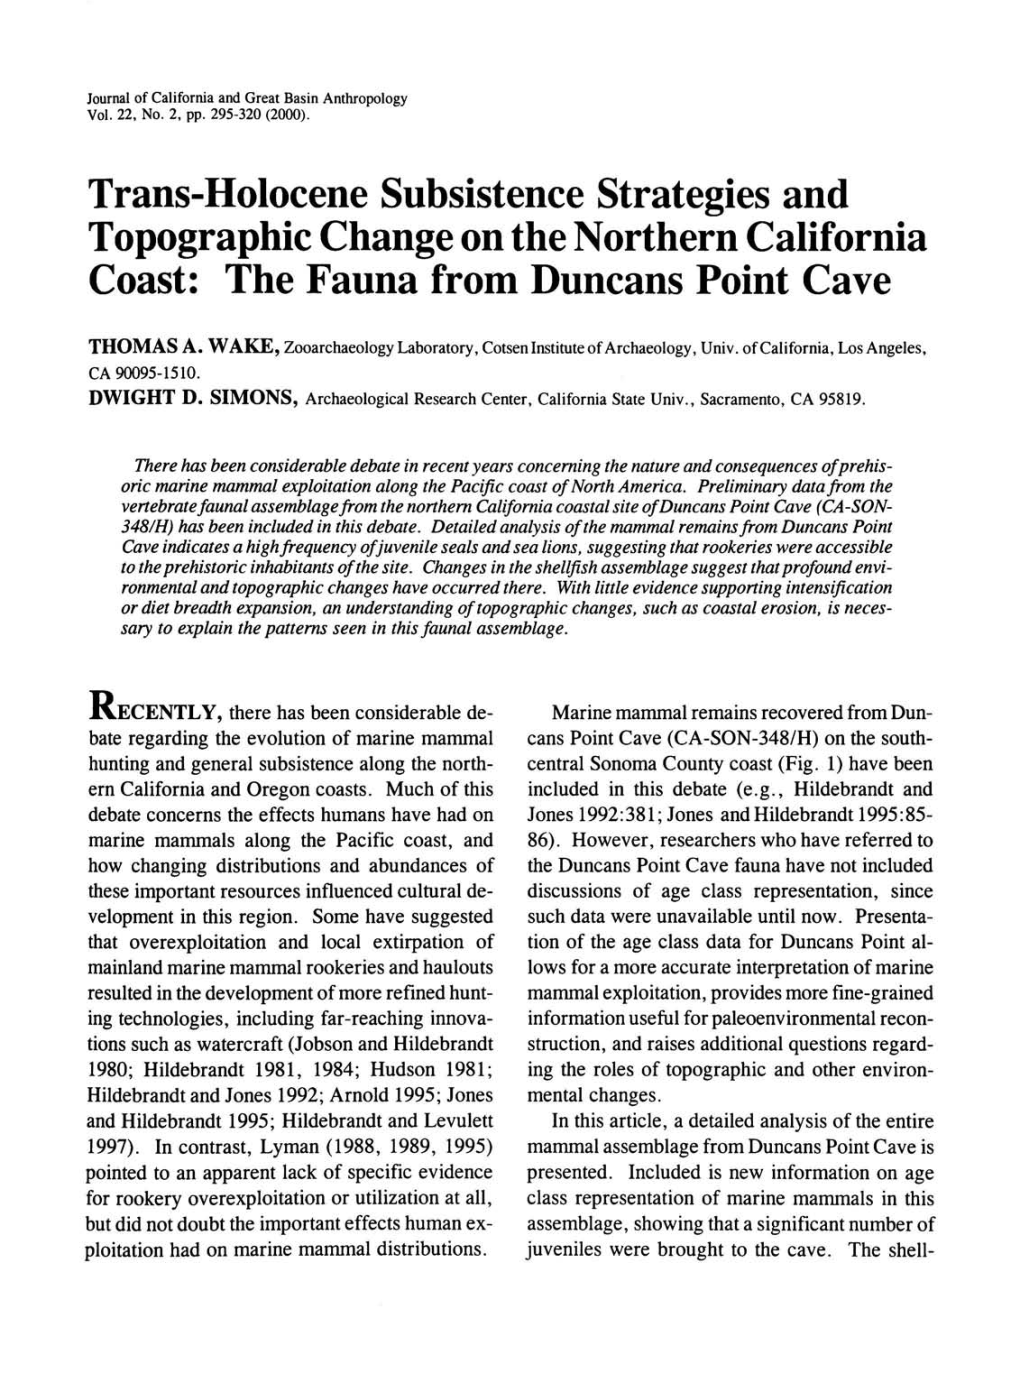 Trans-Holocene Subsistence Strategies and Topographic Change on the Northern Cahfornia Coast: the Fauna from Duncans Point Cave